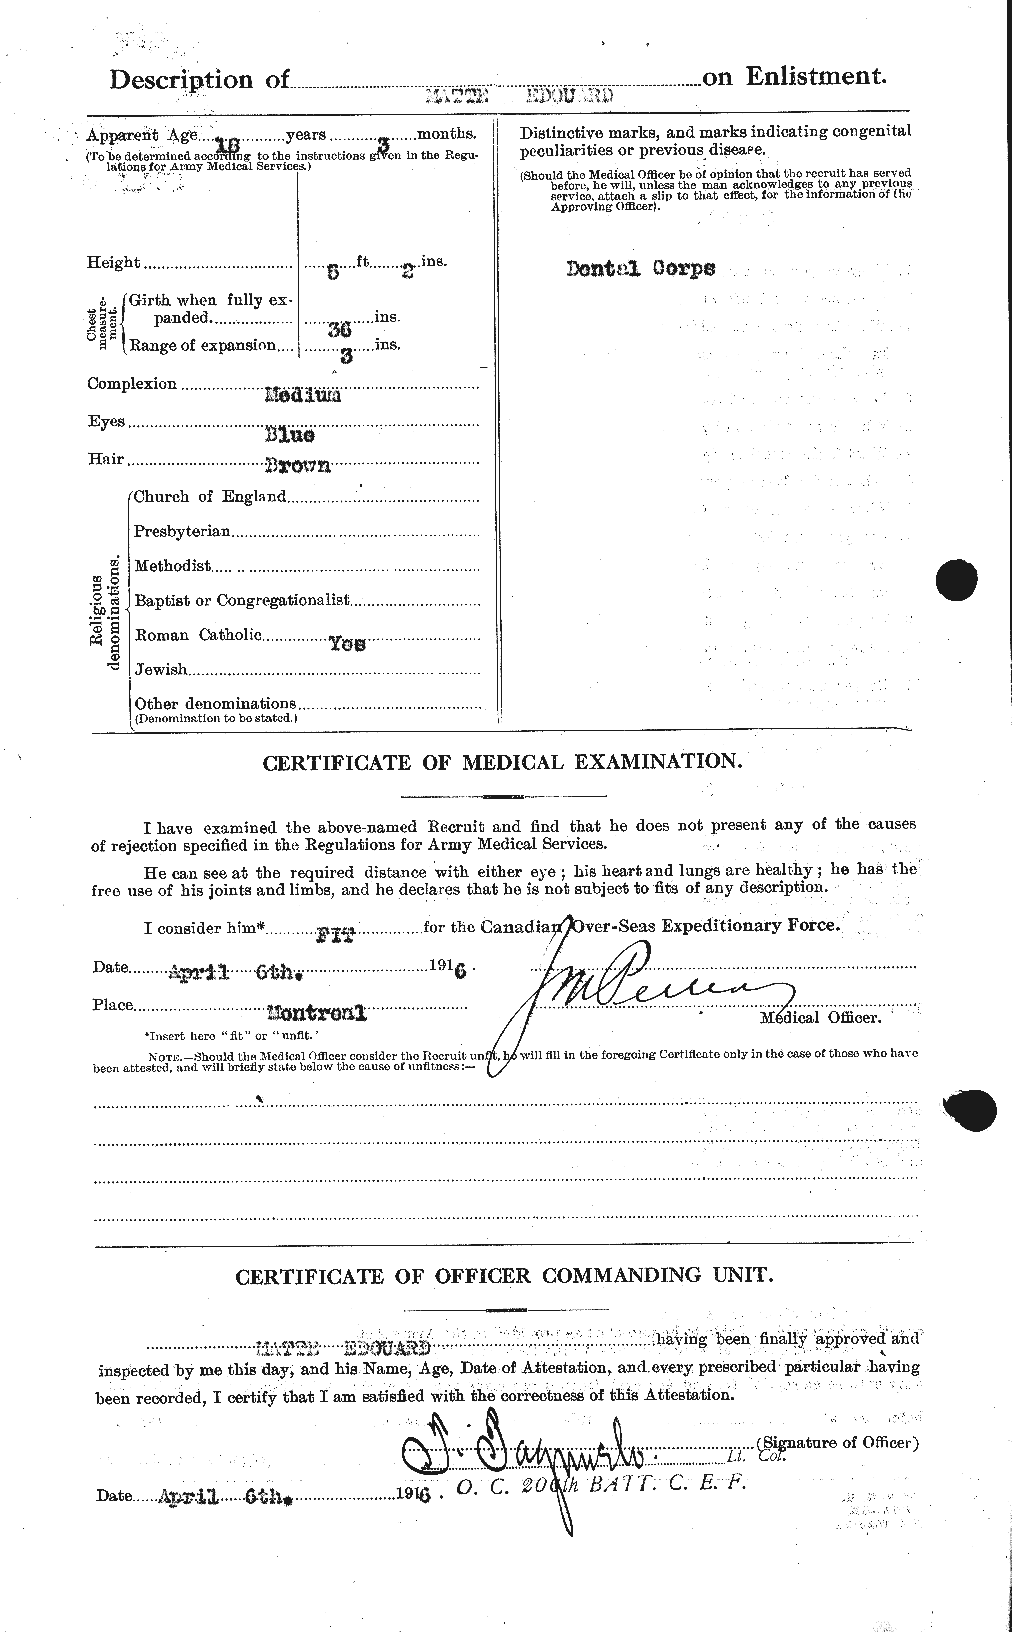 Personnel Records of the First World War - CEF 490173b